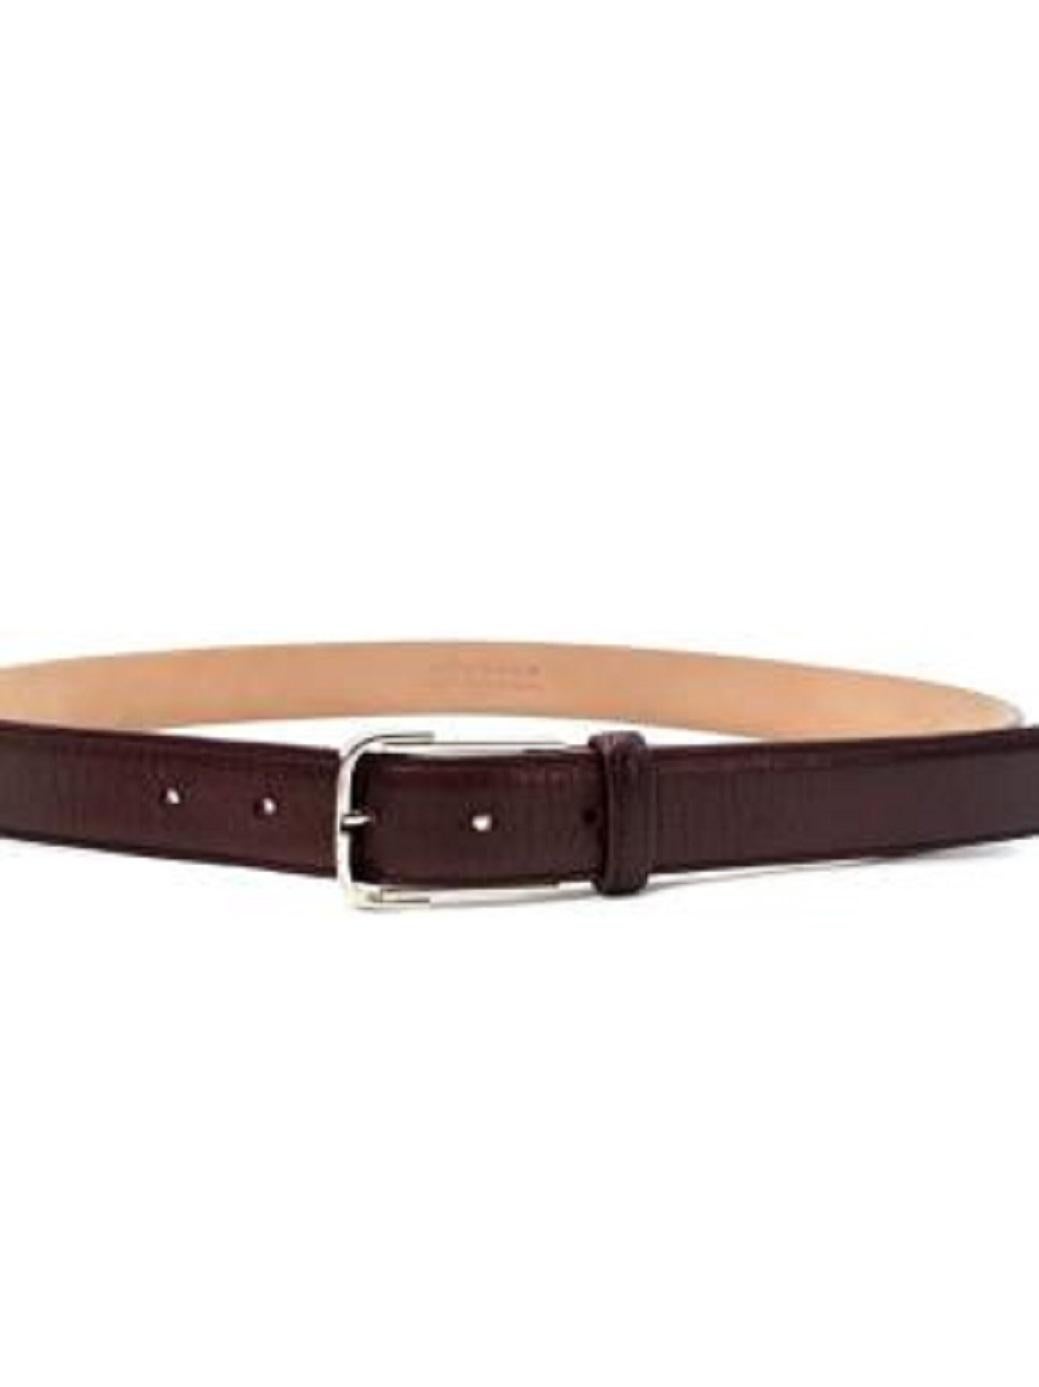 Maison Martin Margiela Burgundy Leather Silver Buckle Belt

- Burgundy leather belt
- Silver-tone buckle with engraved signature numerical branding

Materials:
Leather

Made in Italy

PLEASE NOTE, THESE ITEMS ARE PRE-OWNED AND MAY SHOW SIGNS OF